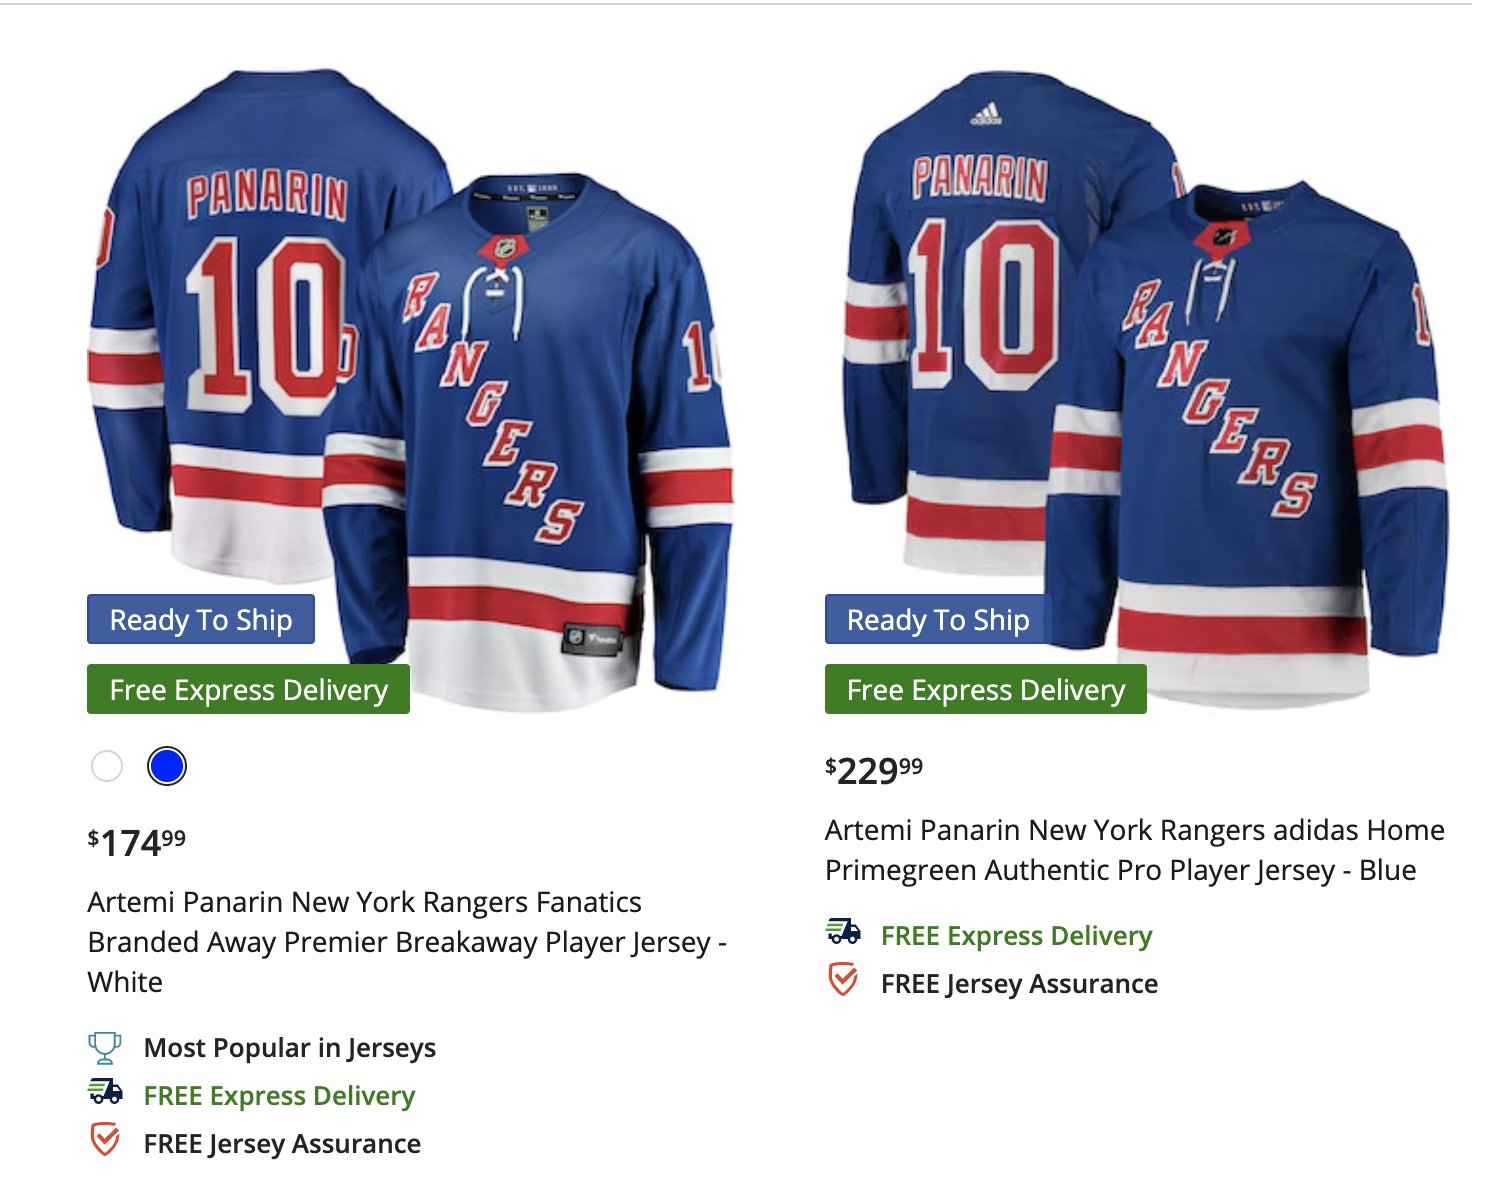 What to know about the new Fanatics NHL replica jerseys